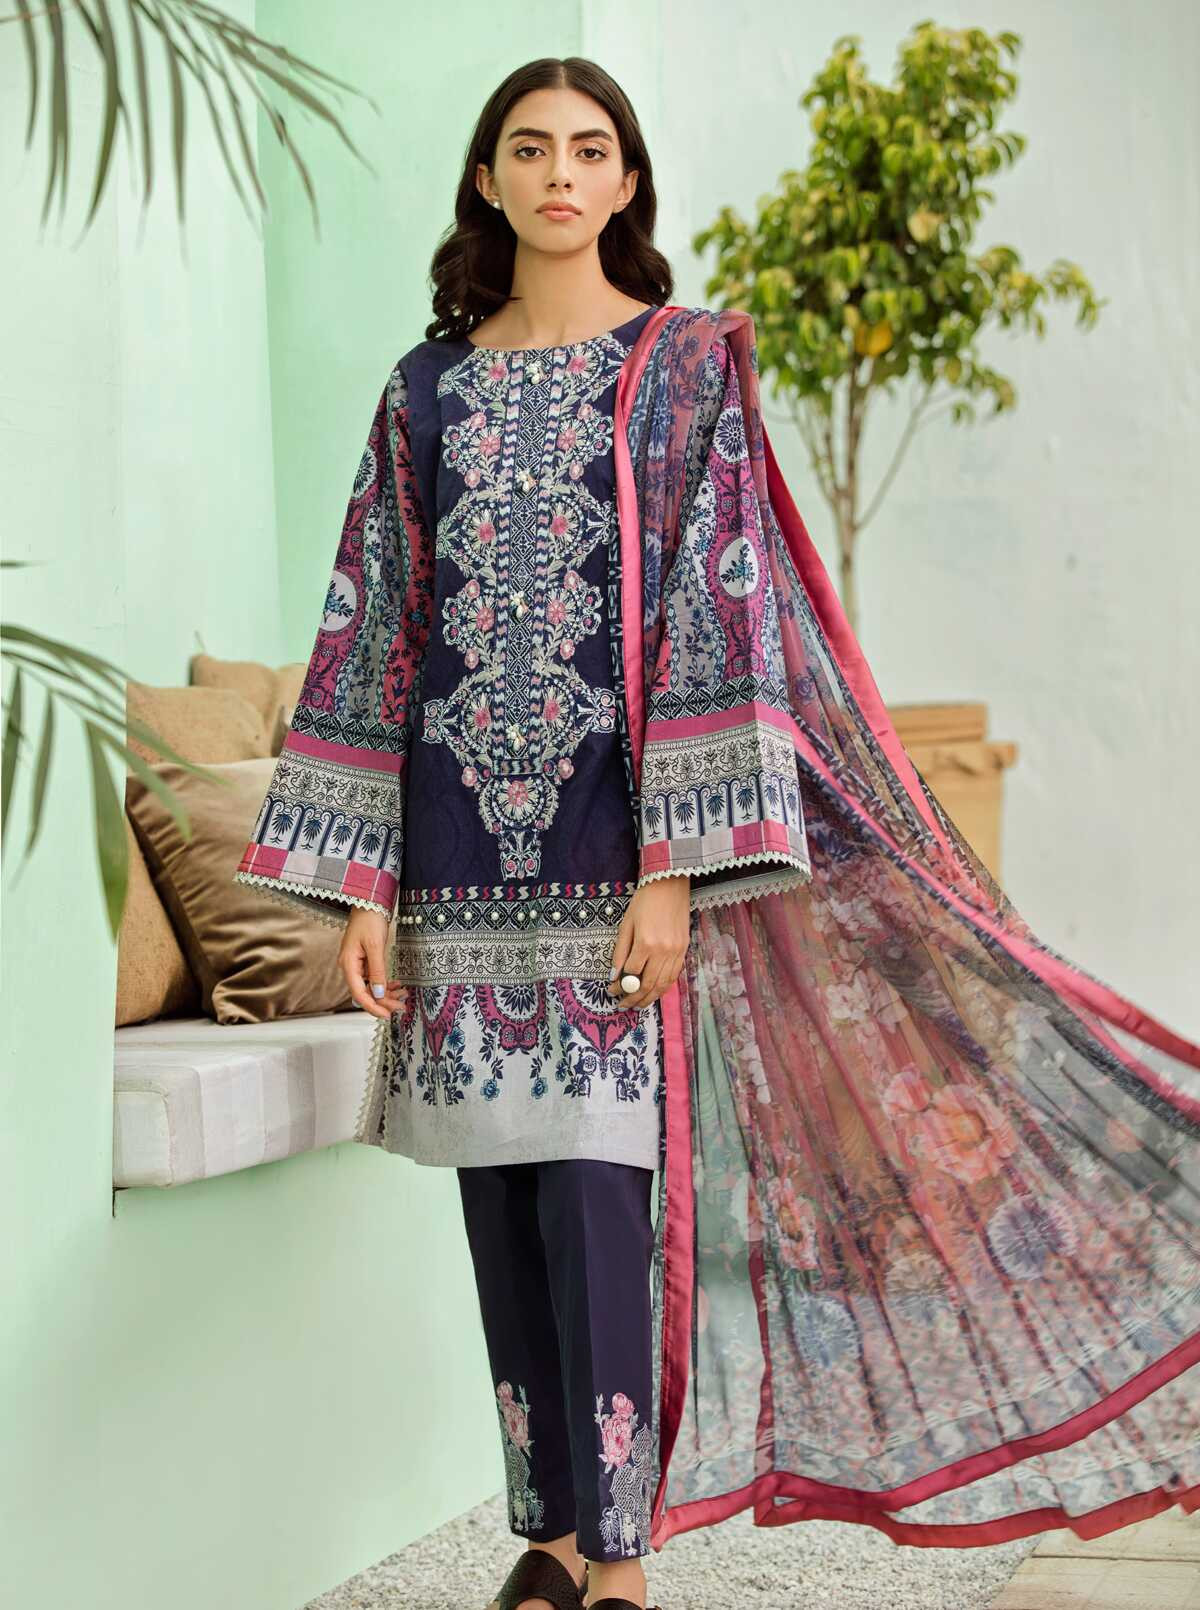 Beechtree Eid Collection Ii Mystic Vista Lawn 3 Piece Lawncollection.pk